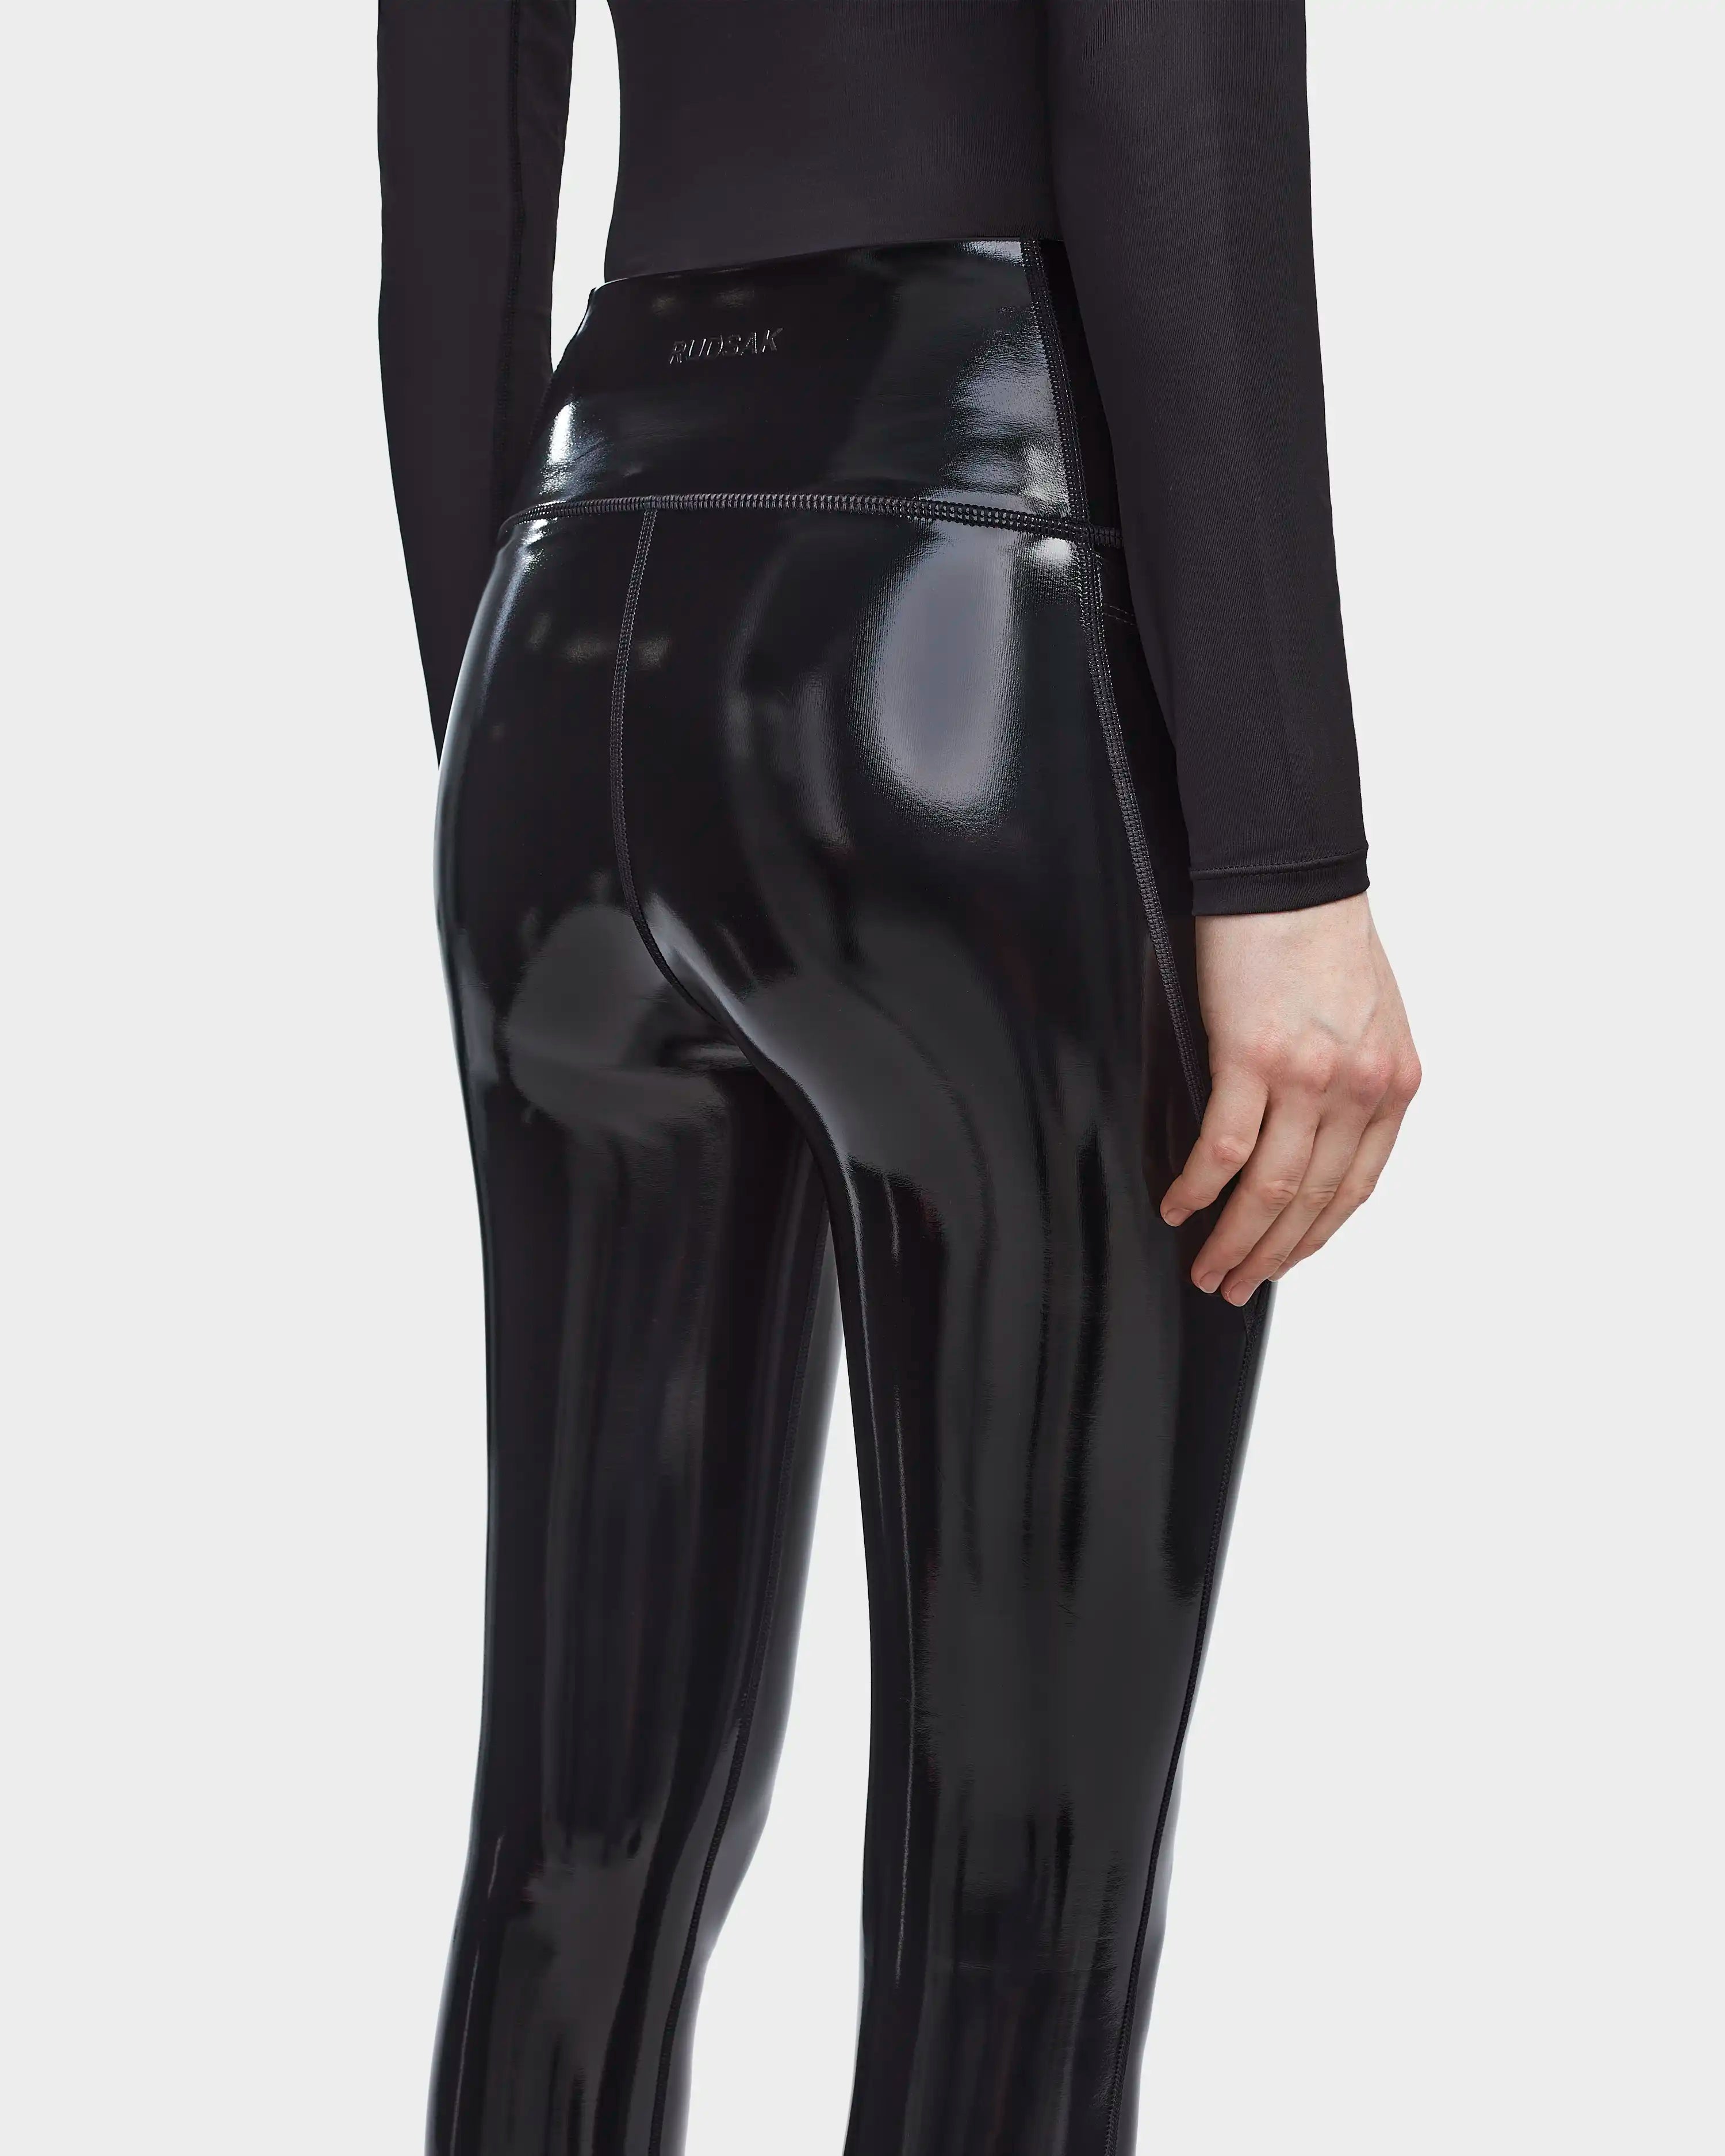 18 Faux Leather Leggings Tested Outfit Ideas 2022  Faux leather leggings  outfit, Black faux leather leggings, Black leather leggings